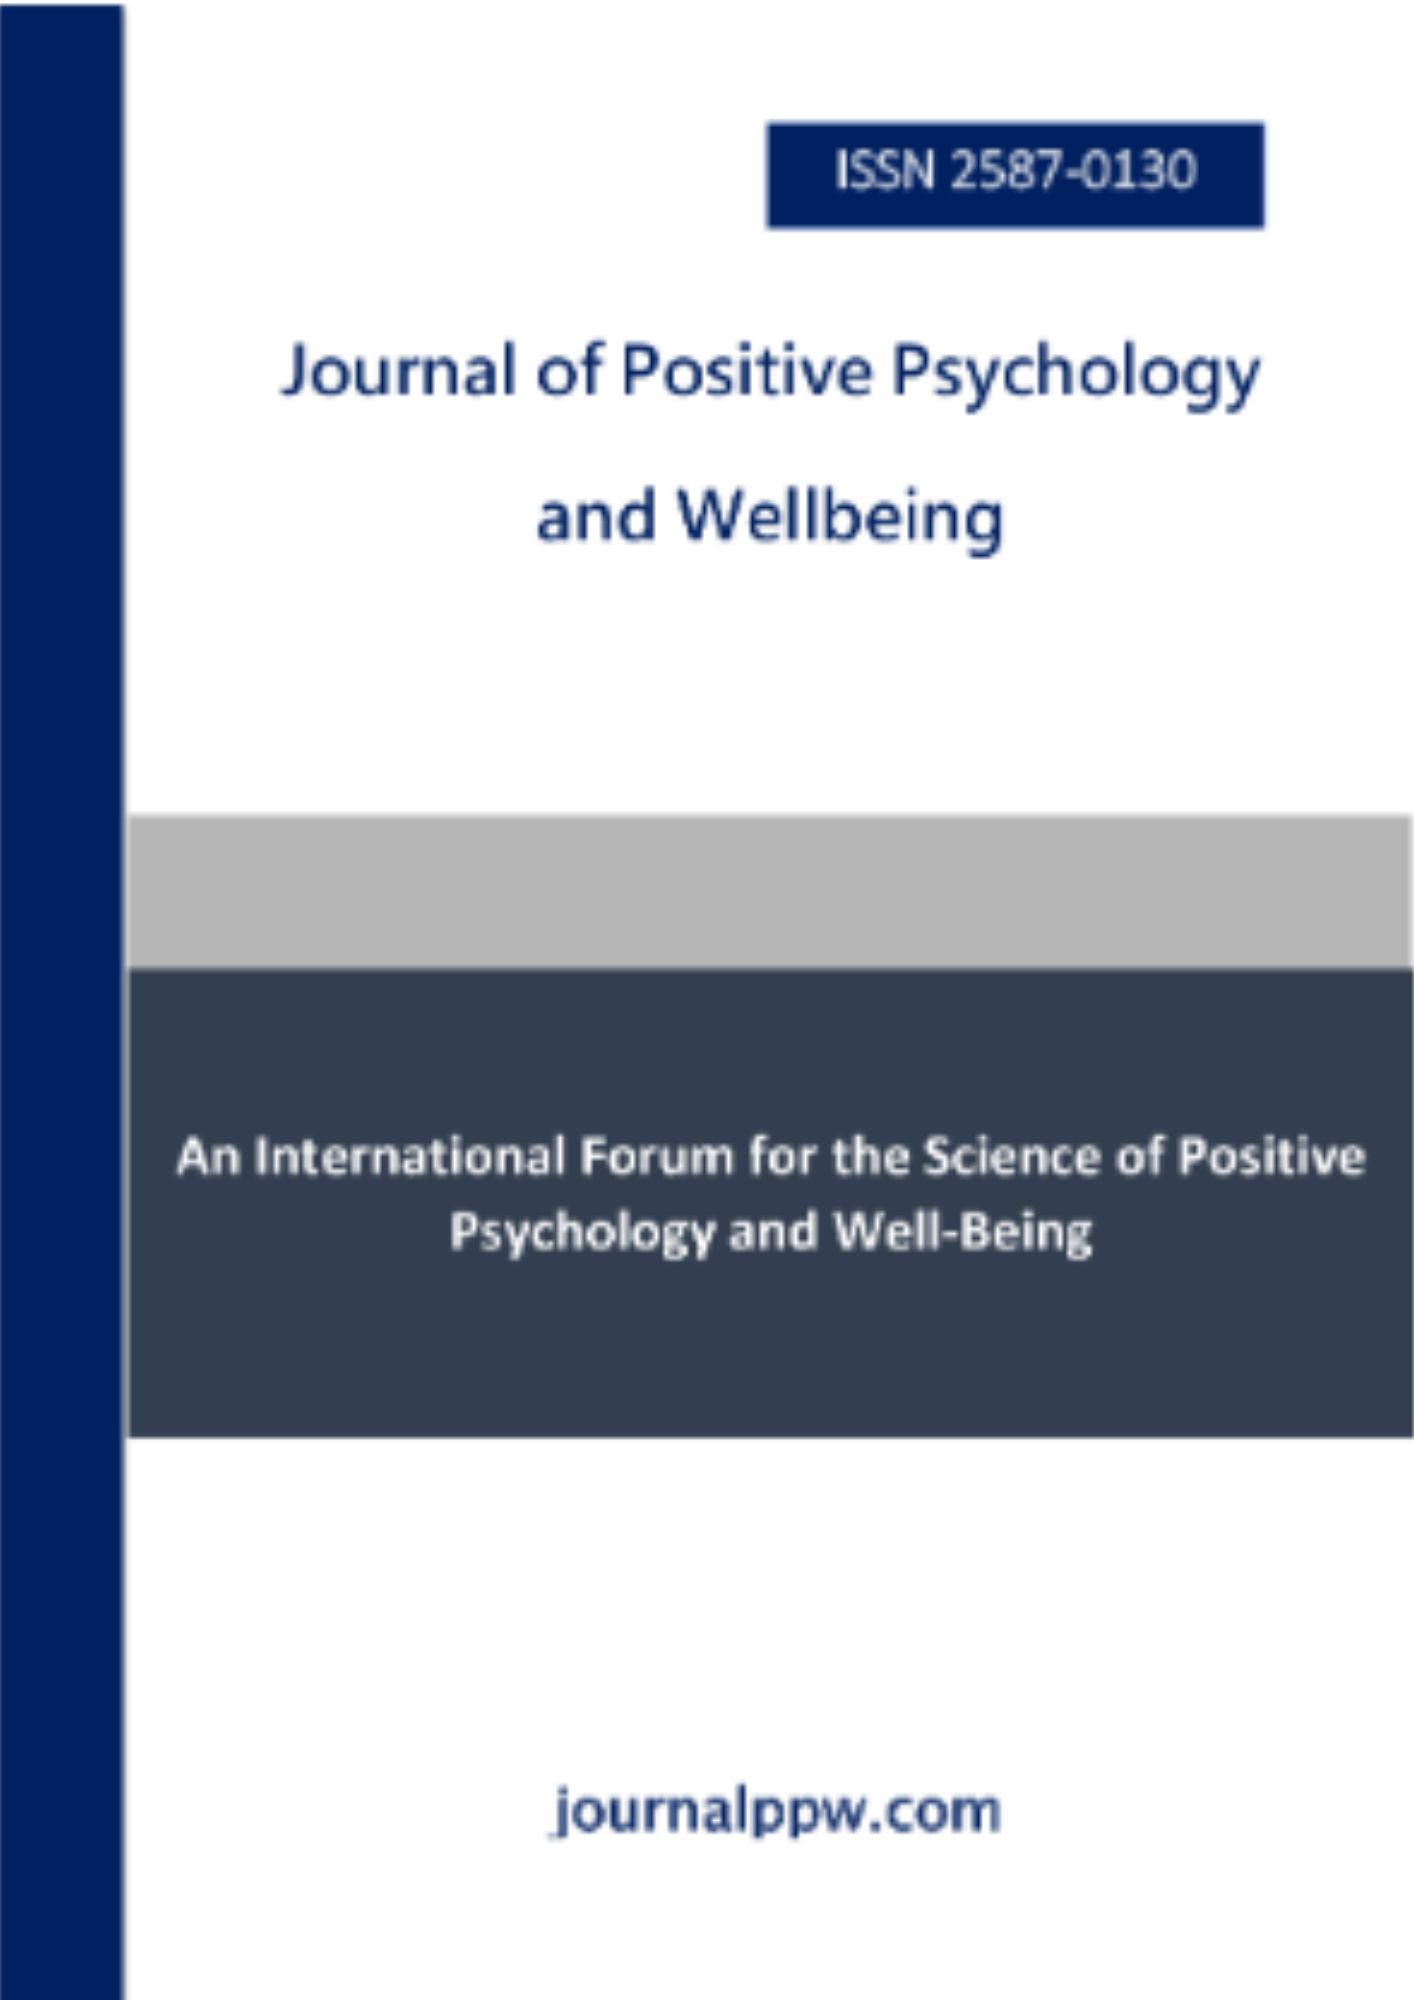 Investigating The Links Between Social Support, Psychological Distress, And Life Satisfaction: A Mediation Analysis Among Azerbaijani Adults